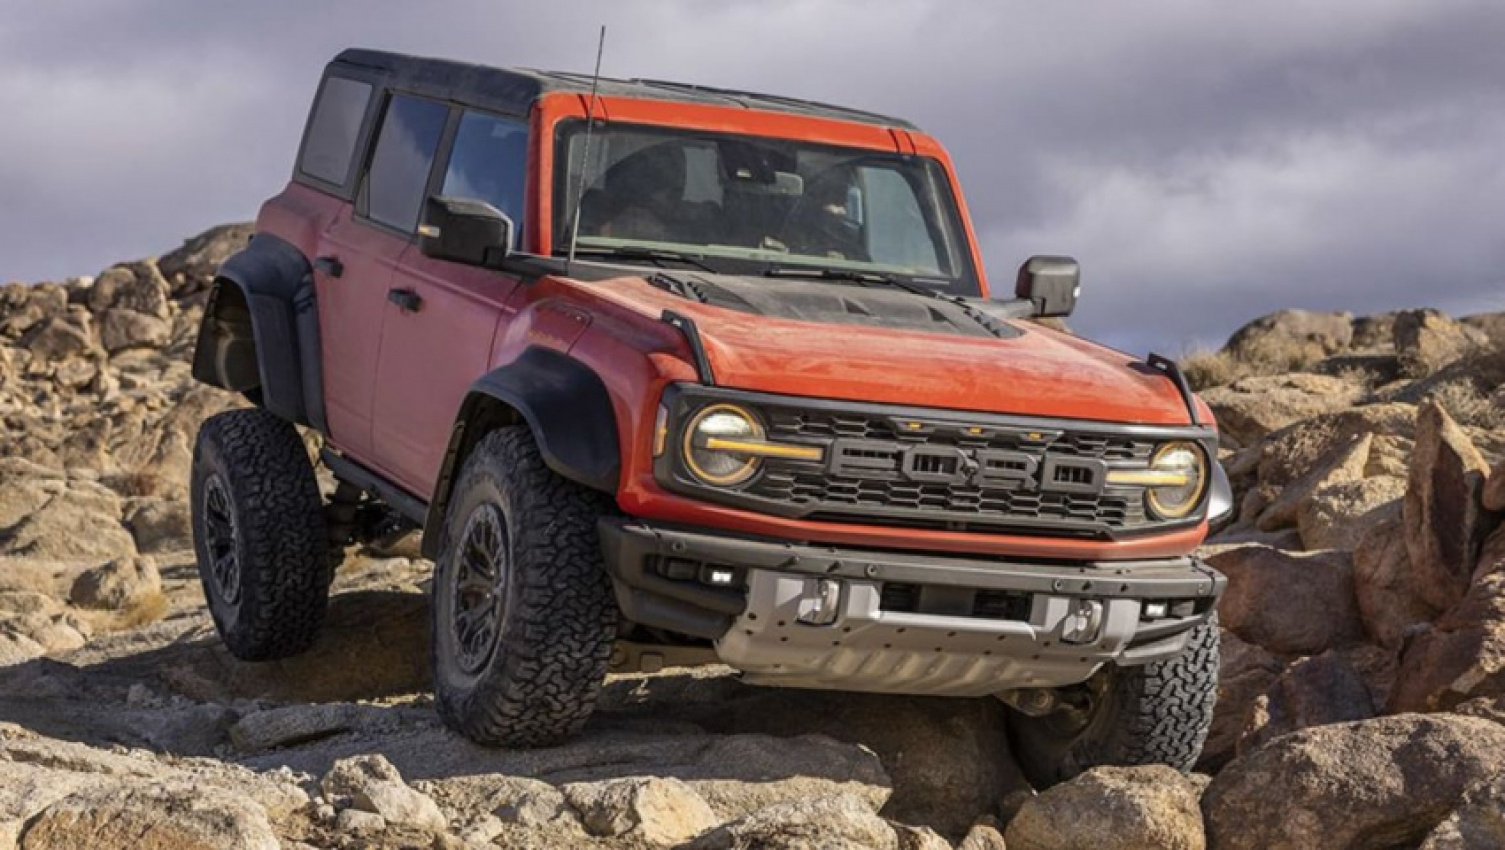 autos, cars, ford, mazda, nissan, toyota, ford bronco, ford news, ford ranger, ford ranger 2022, ford ranger raptor, ford suv range, industry news, mazda bt-50, nissan navara, off road, showroom news, toyota hilux, what's in store for the 2022 ford ranger raptor? new bronco raptor flagship points the way forward for toyota hilux rugged x, mazda bt-50 thunder and nissan navara pro-4x warrior rival's return!